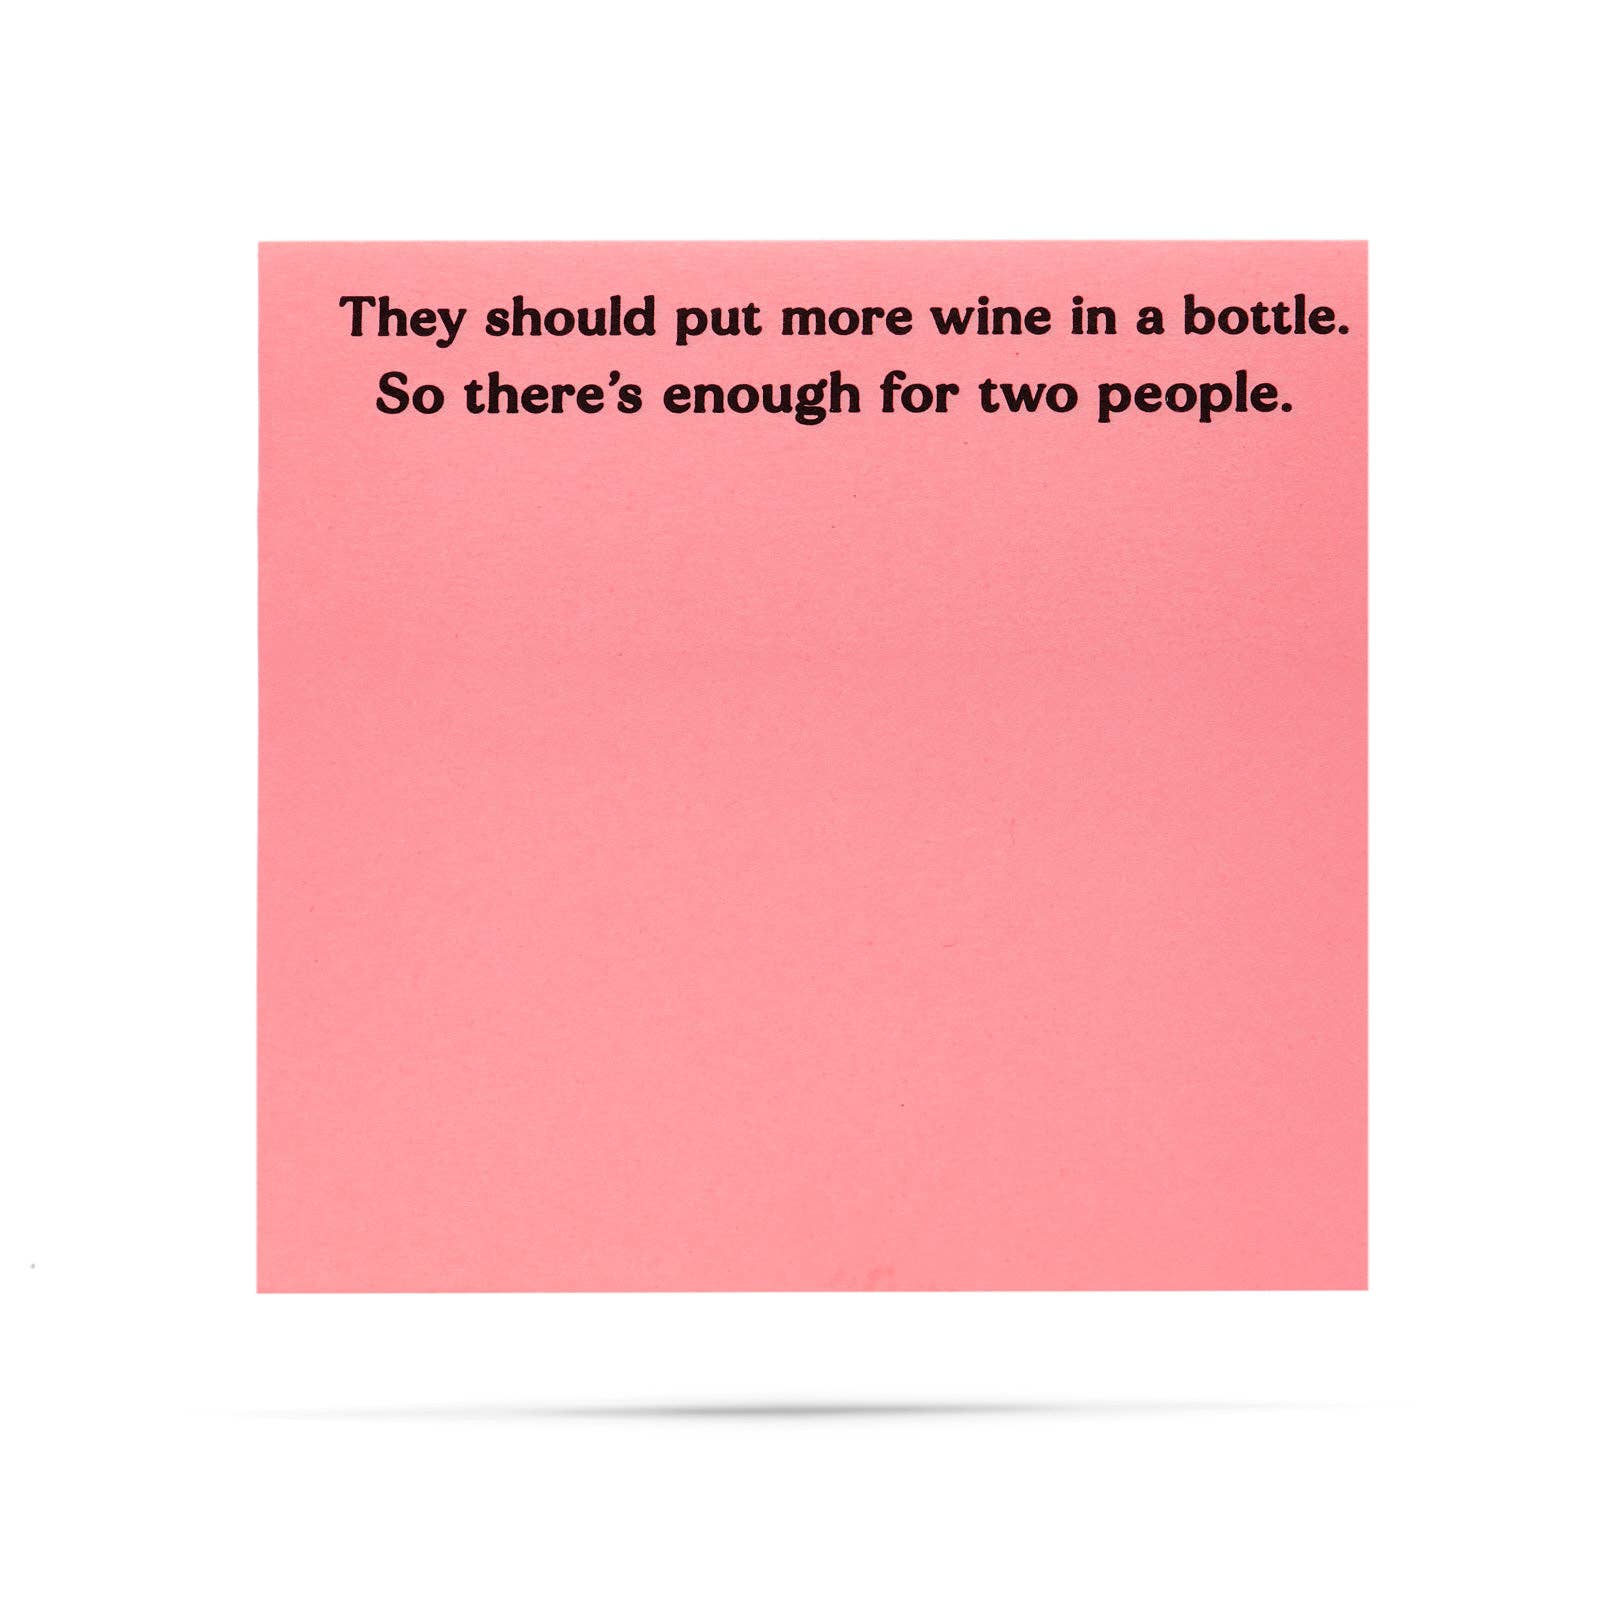 They should put more wine in a bottle | funny sticky notes